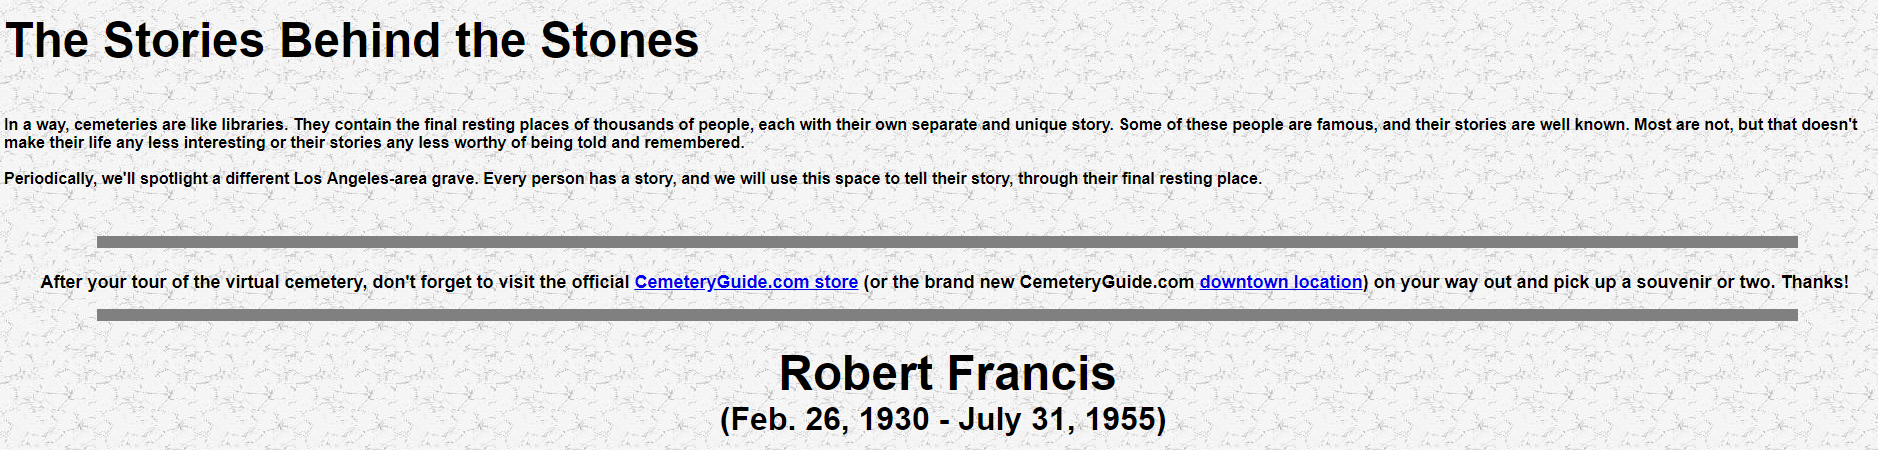 cermetery guide 1.png